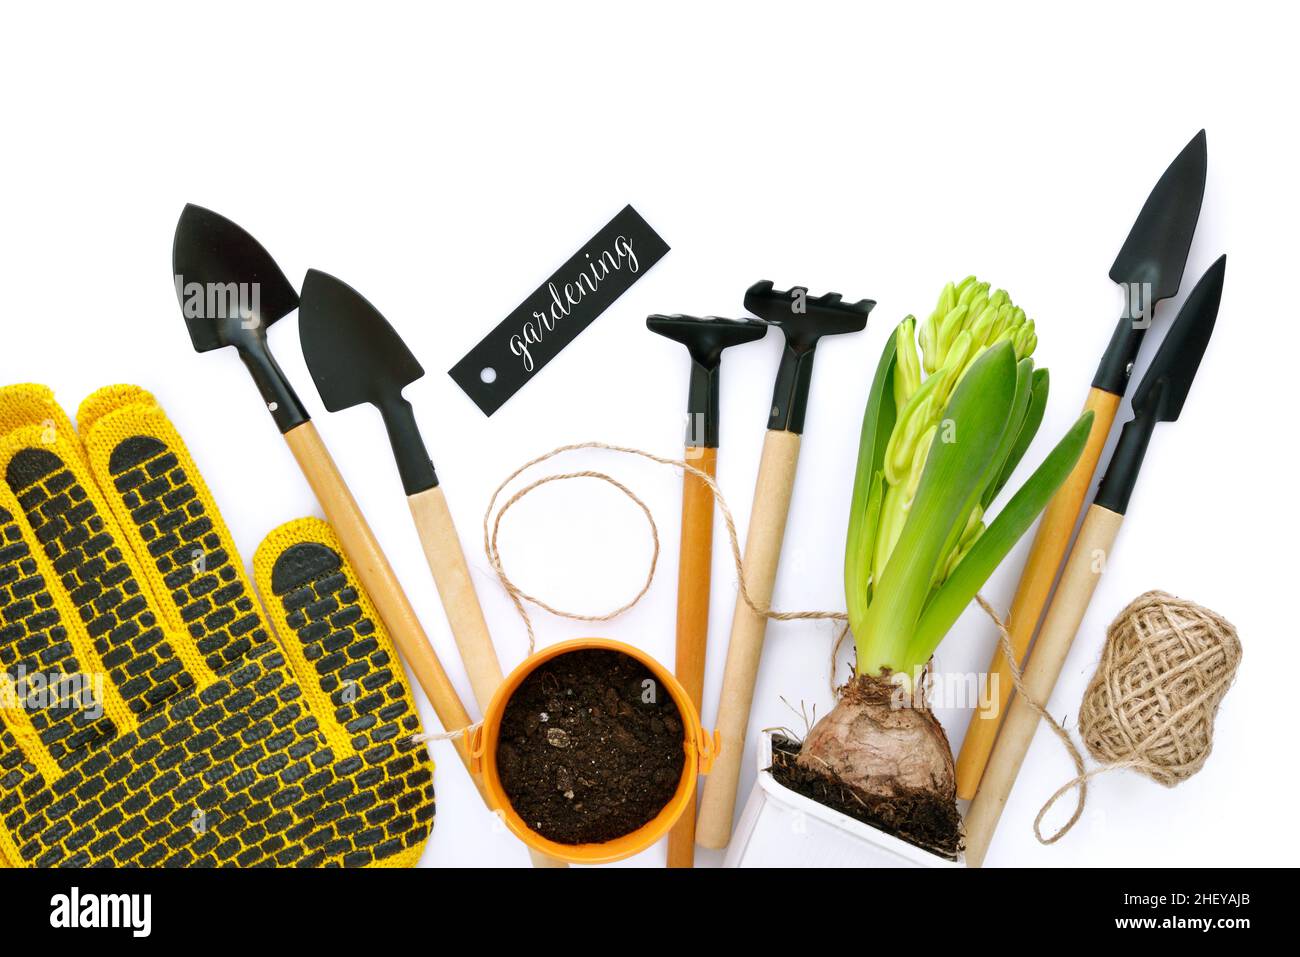 Garden tools and spring hyacinth flower on white background. Gardening concept. Top view Stock Photo